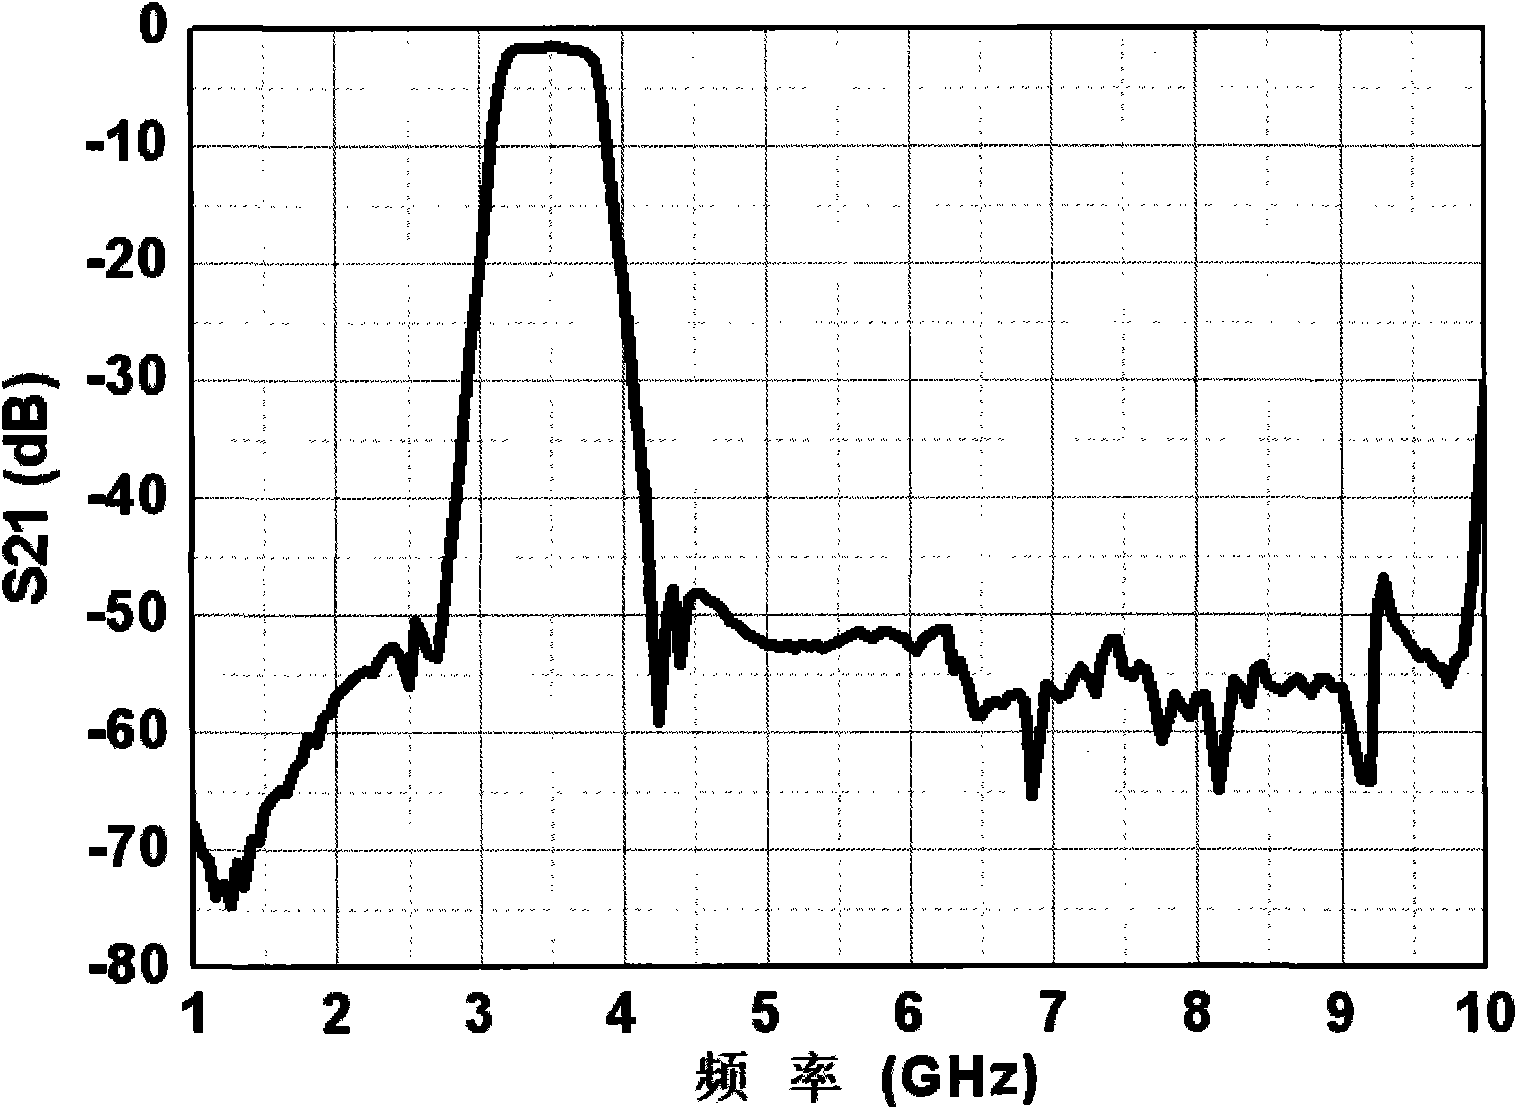 Microstrip dual-mode filter with features of wide stop band and low spurious